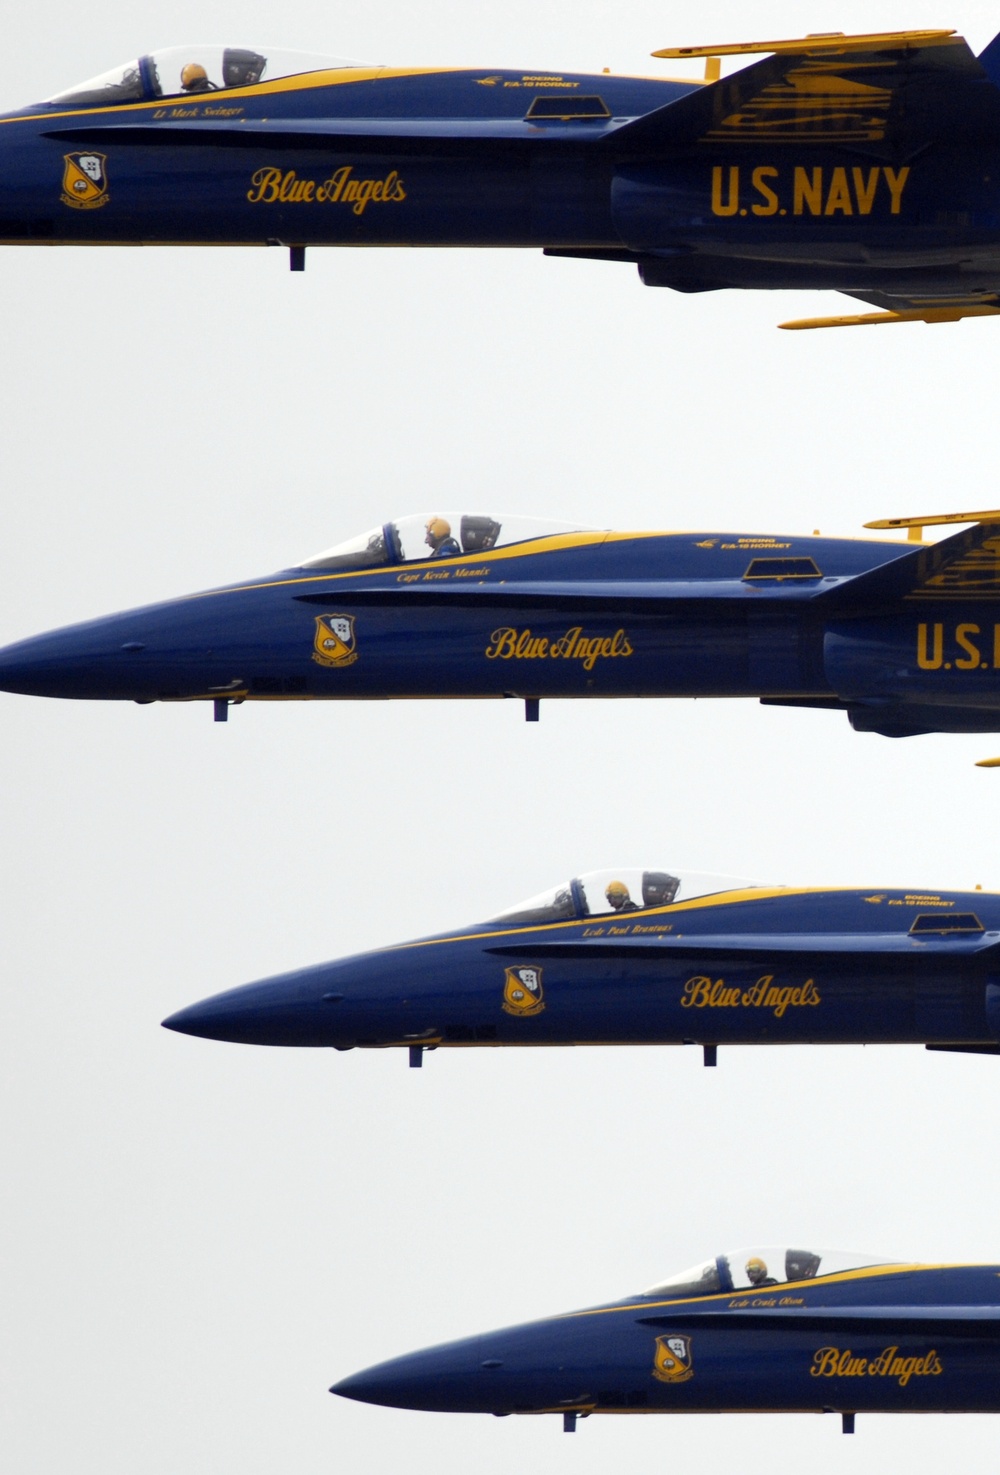 Blue Angels Soar During the 50th Anniversary Air Show at Naval Air Station Oceana